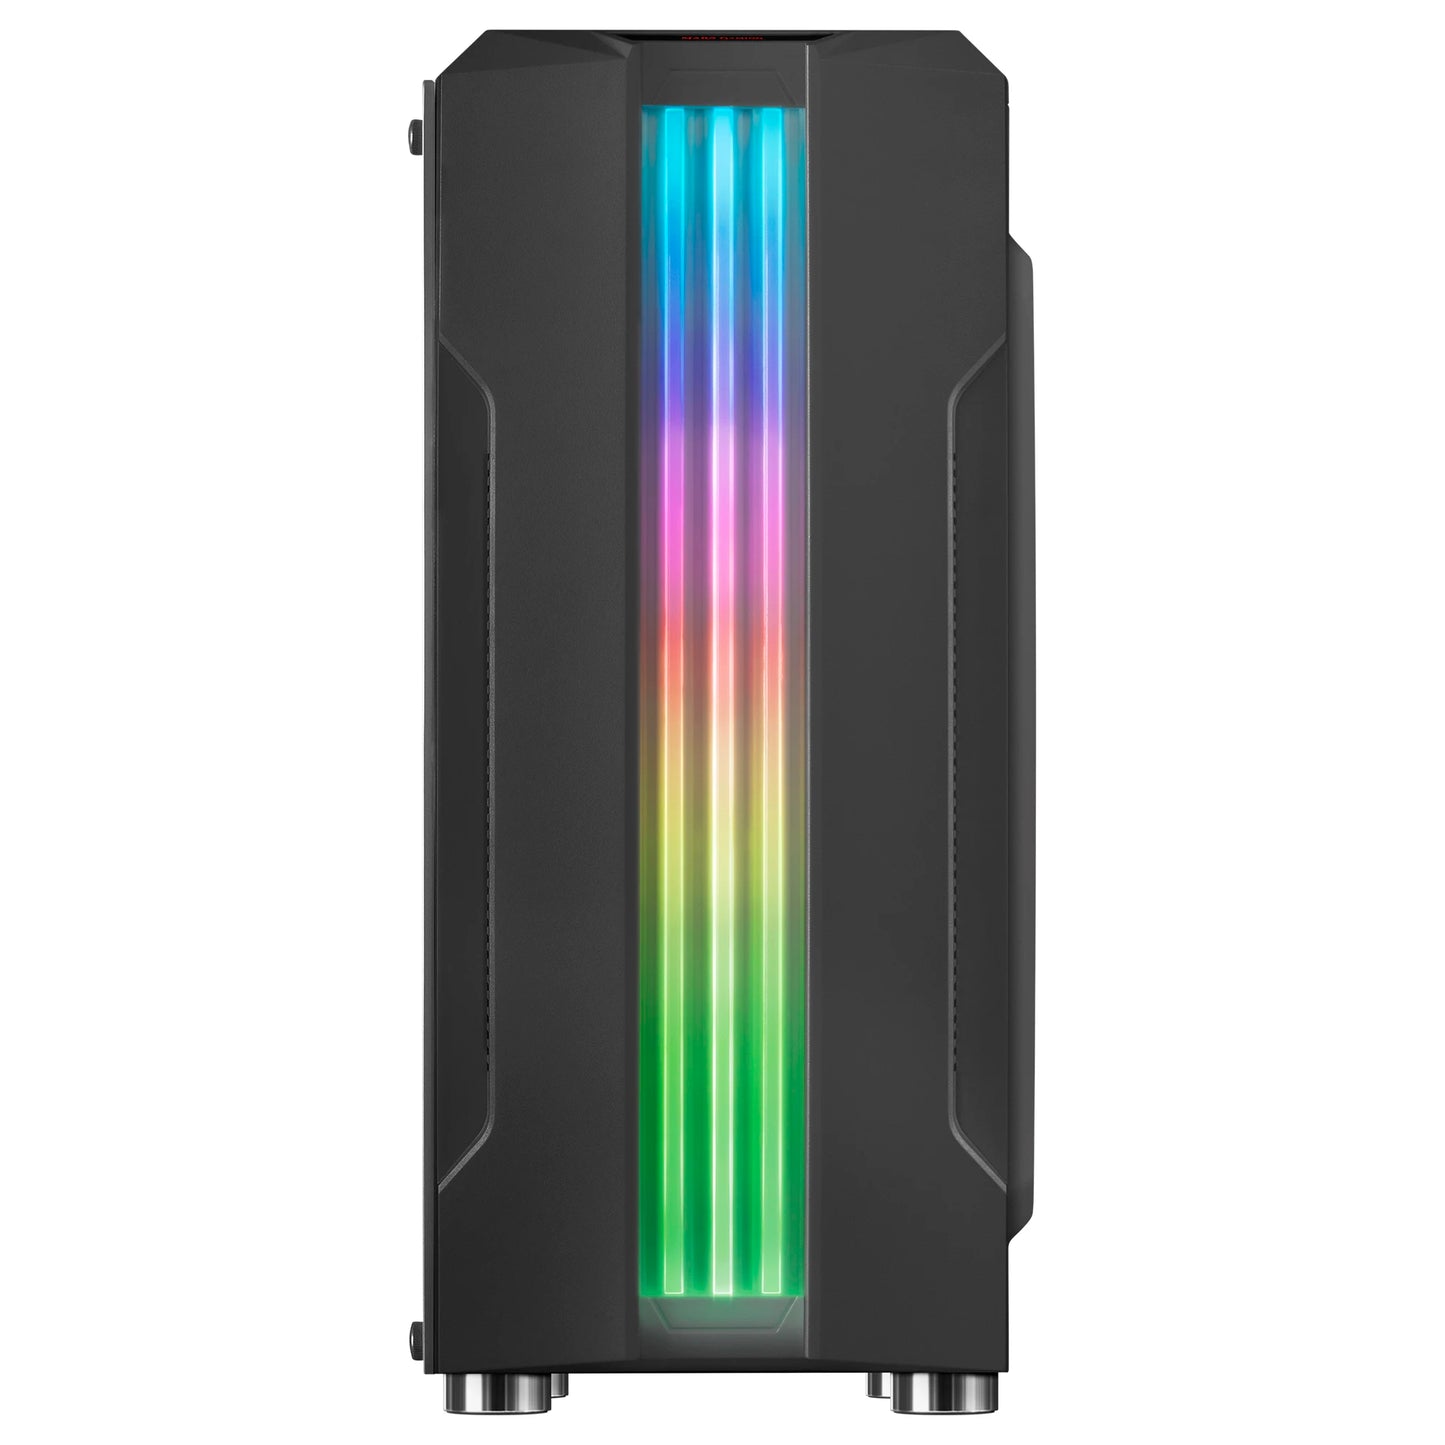 Mars Gaming MCK, PC Case, Midtower, Triple LED strip, tempered glass